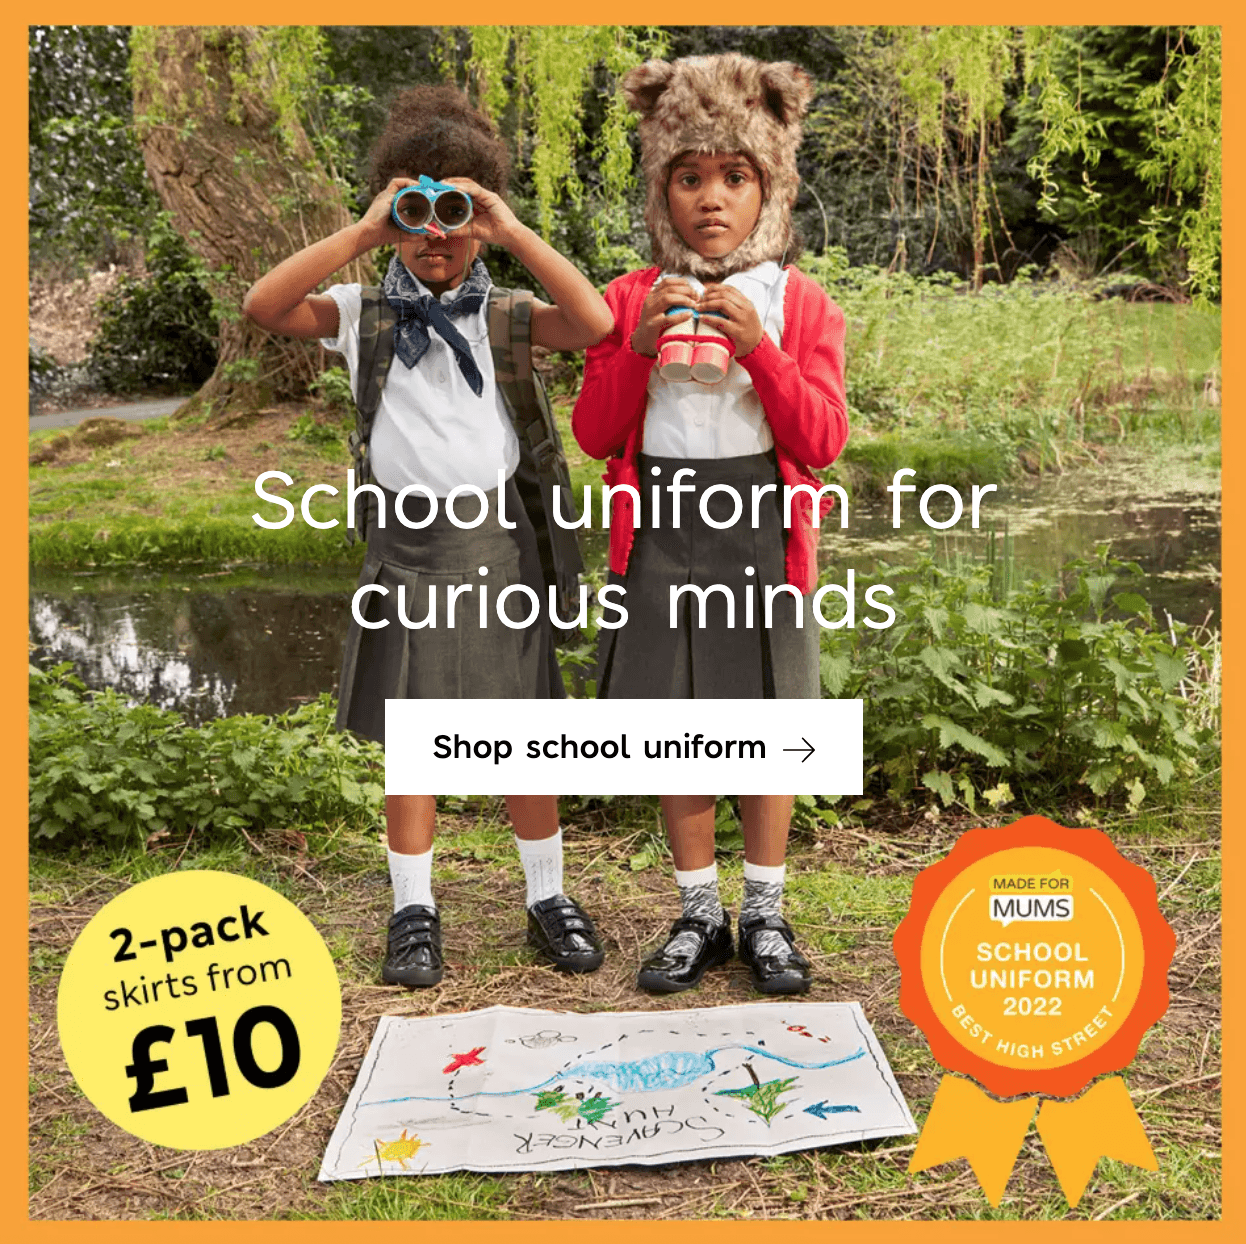 A screenshot of M&S' school uniform website page with a promotion for a two pack of skirts for £10.